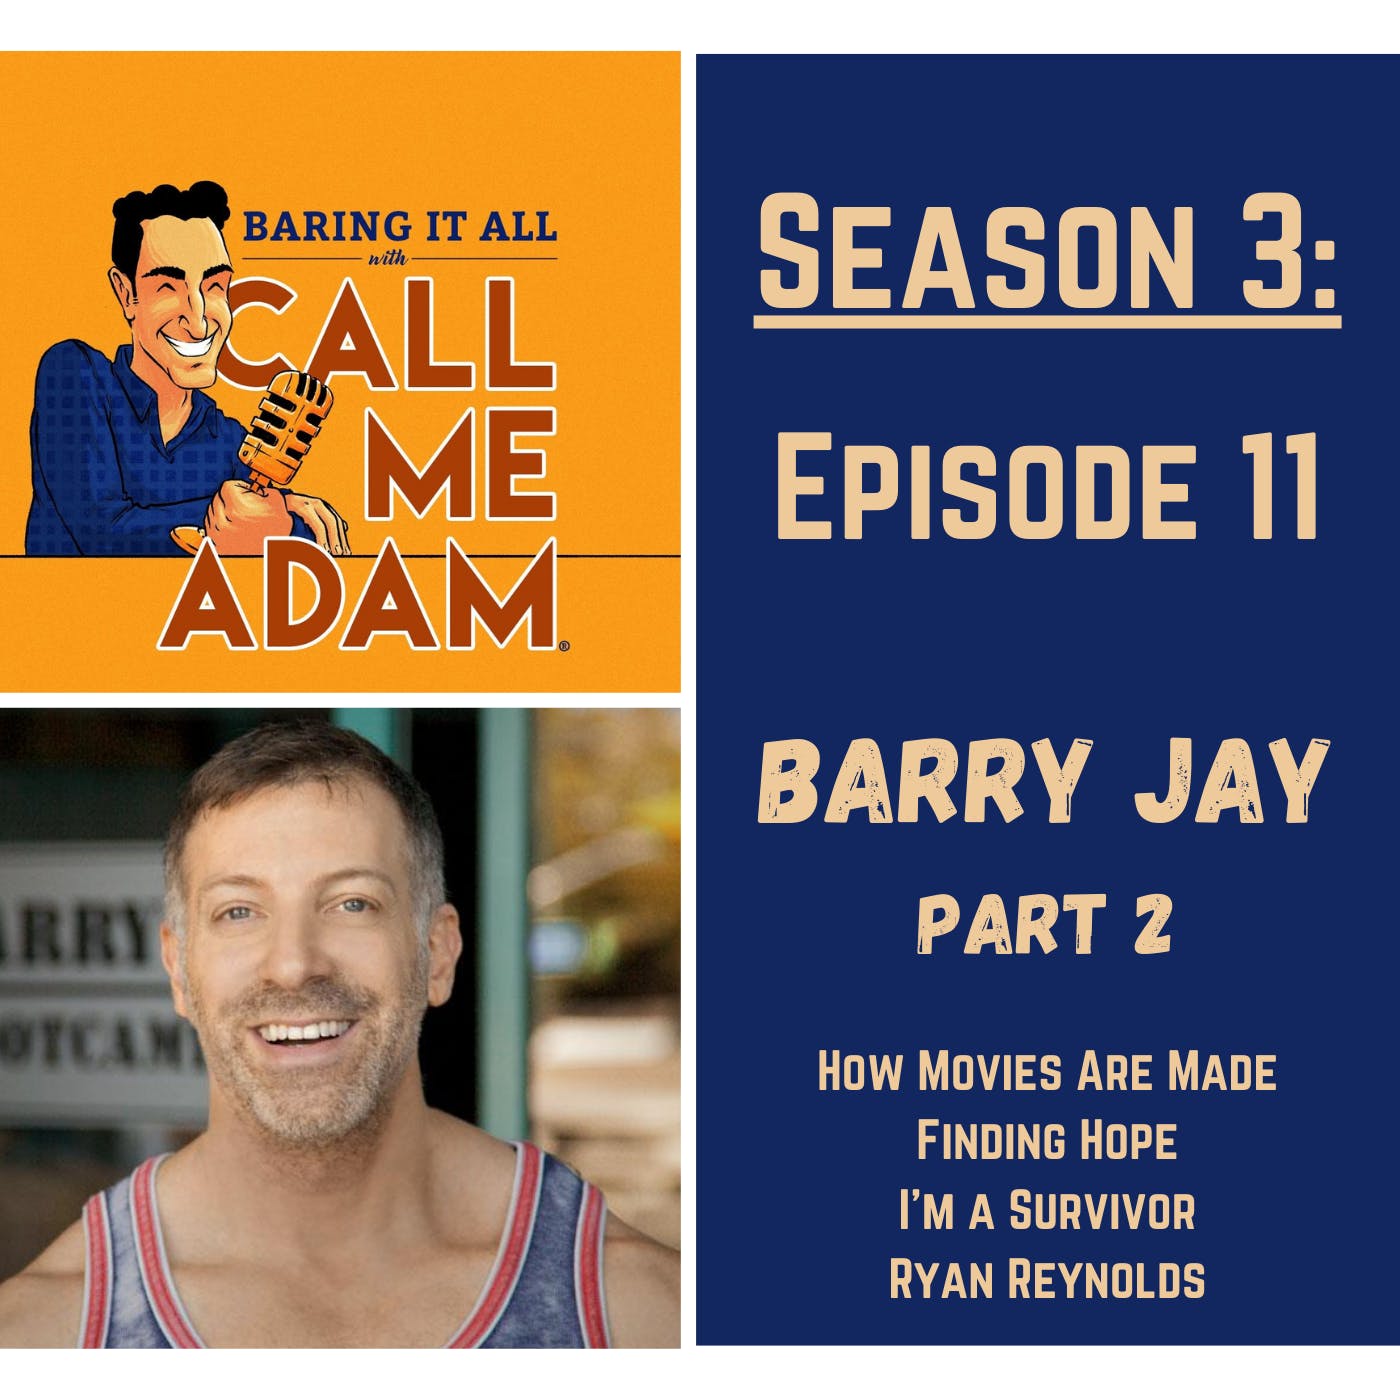 Season 3: Episode 11: Part 2: Barry Jay Interview: Finding Hope During Dark Times